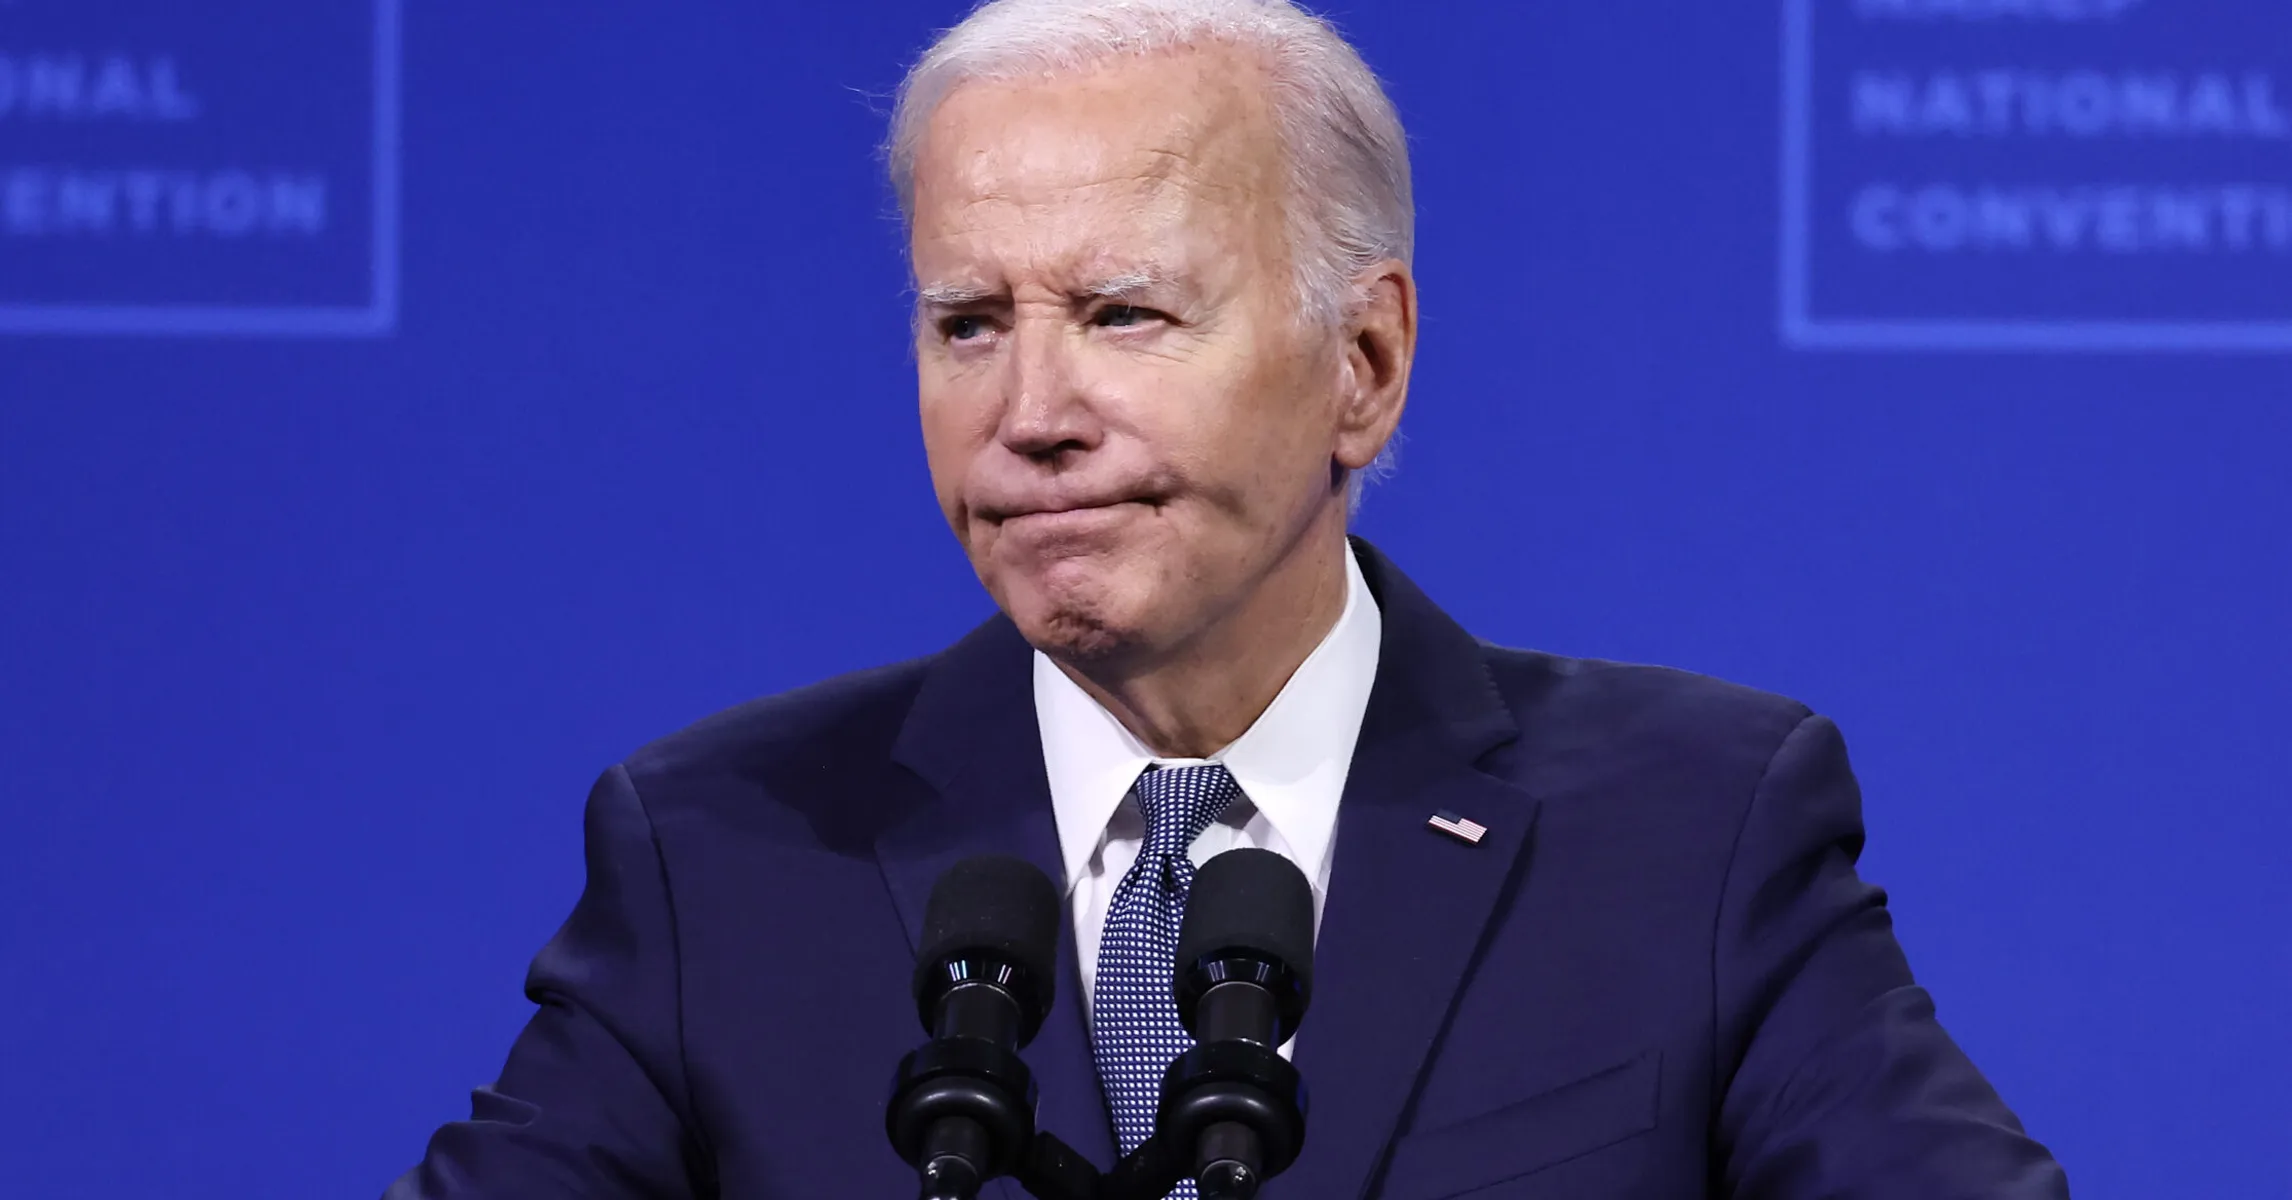 Body-Cam Footage Of Sonya Massey's Killing Sparks Outrage, Leading To Impassioned Statement From Joe Biden